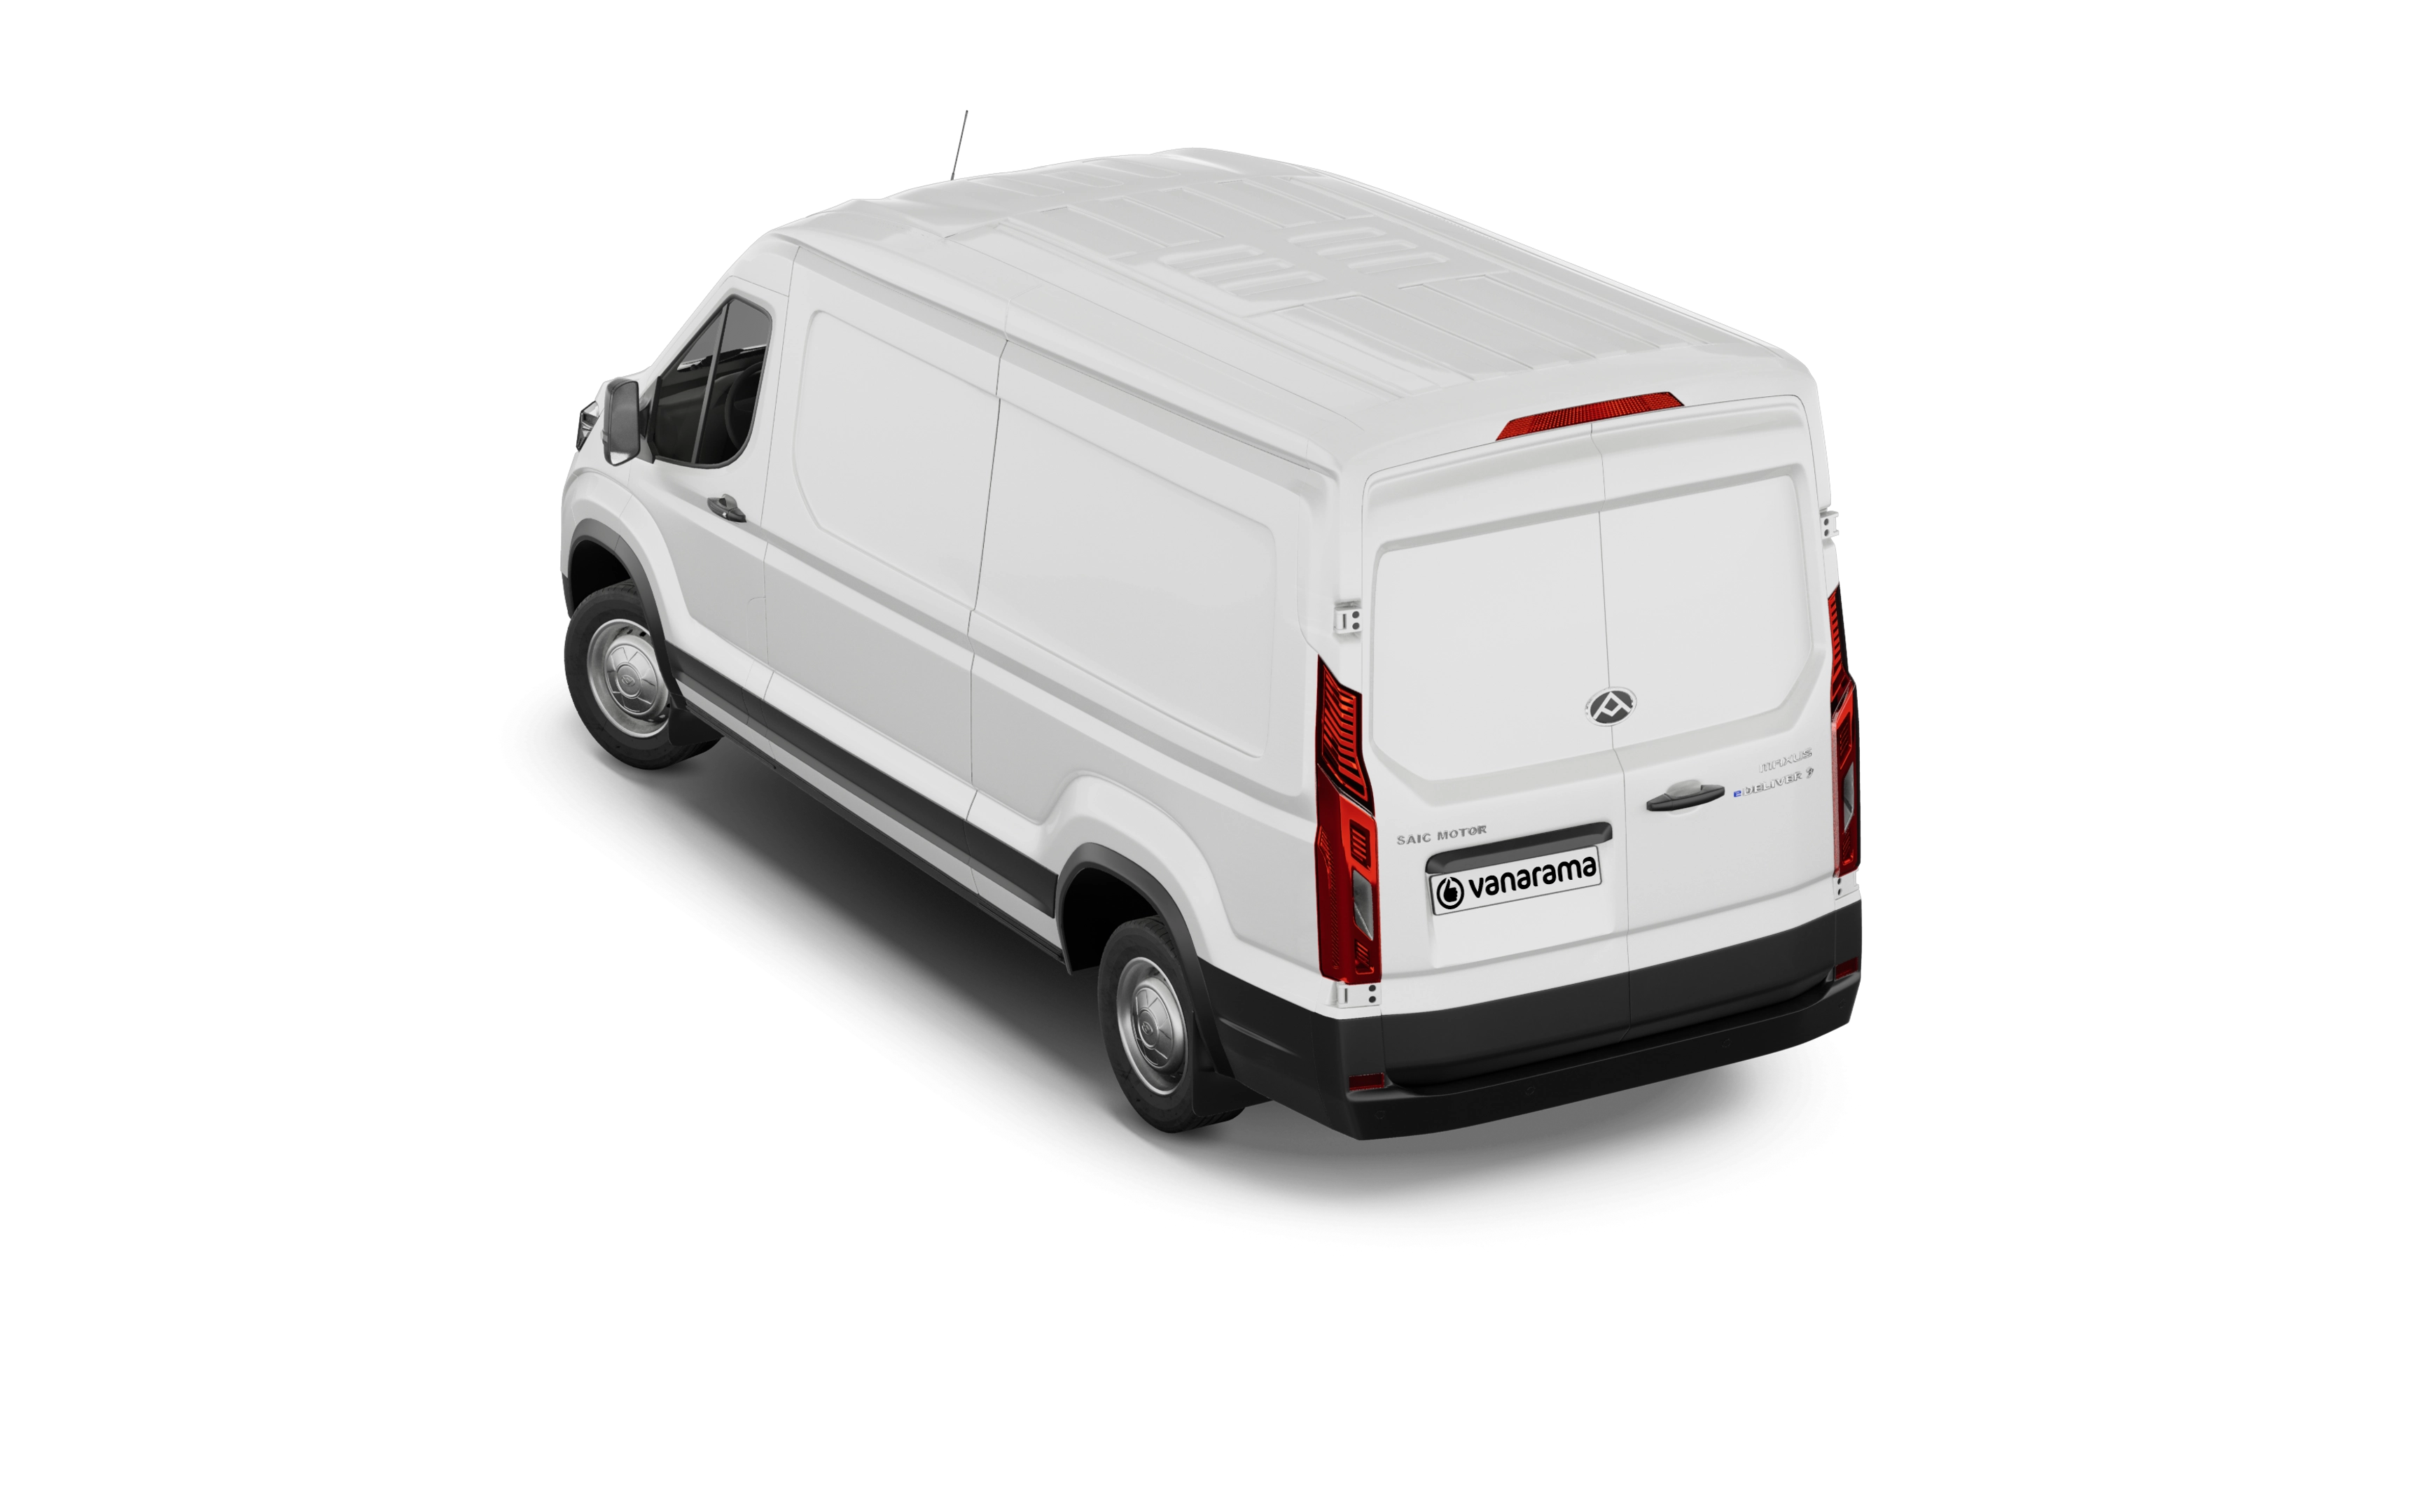 Maxus e deliver 9 mwb electric fwd 150kw high roof van 51.5kwh auto